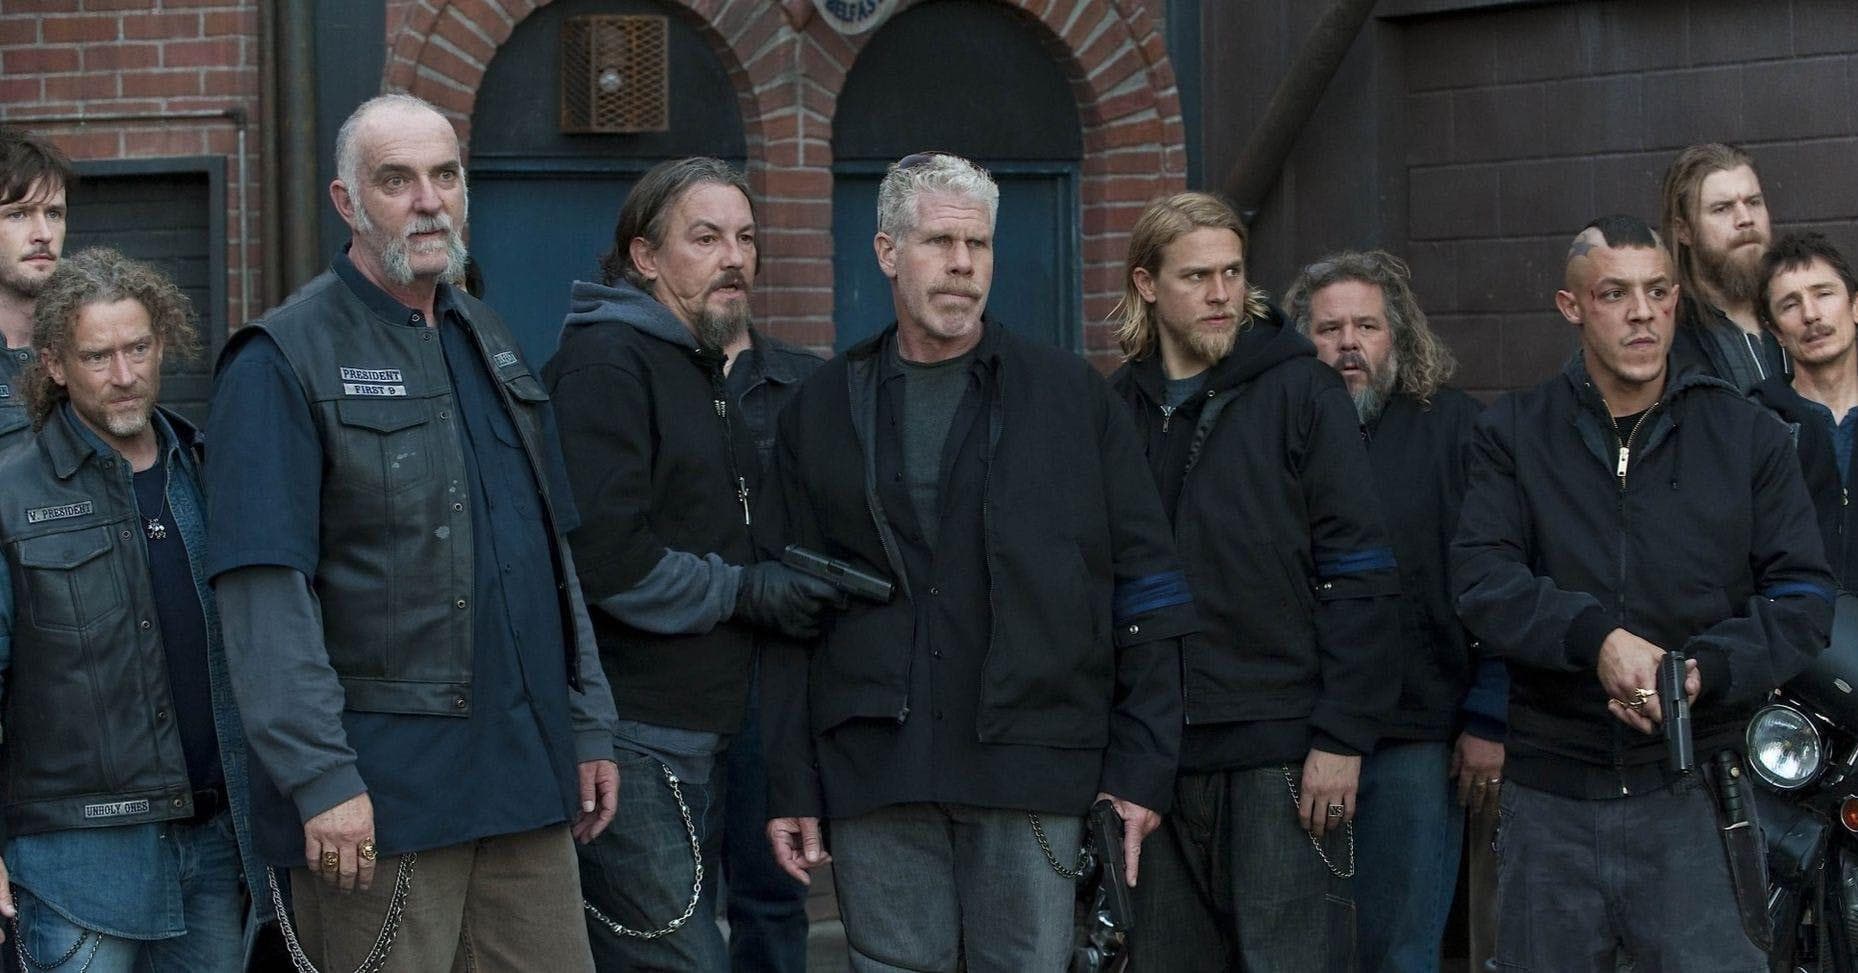 25 Sons of Anarchy Trivia Facts You May Not Know